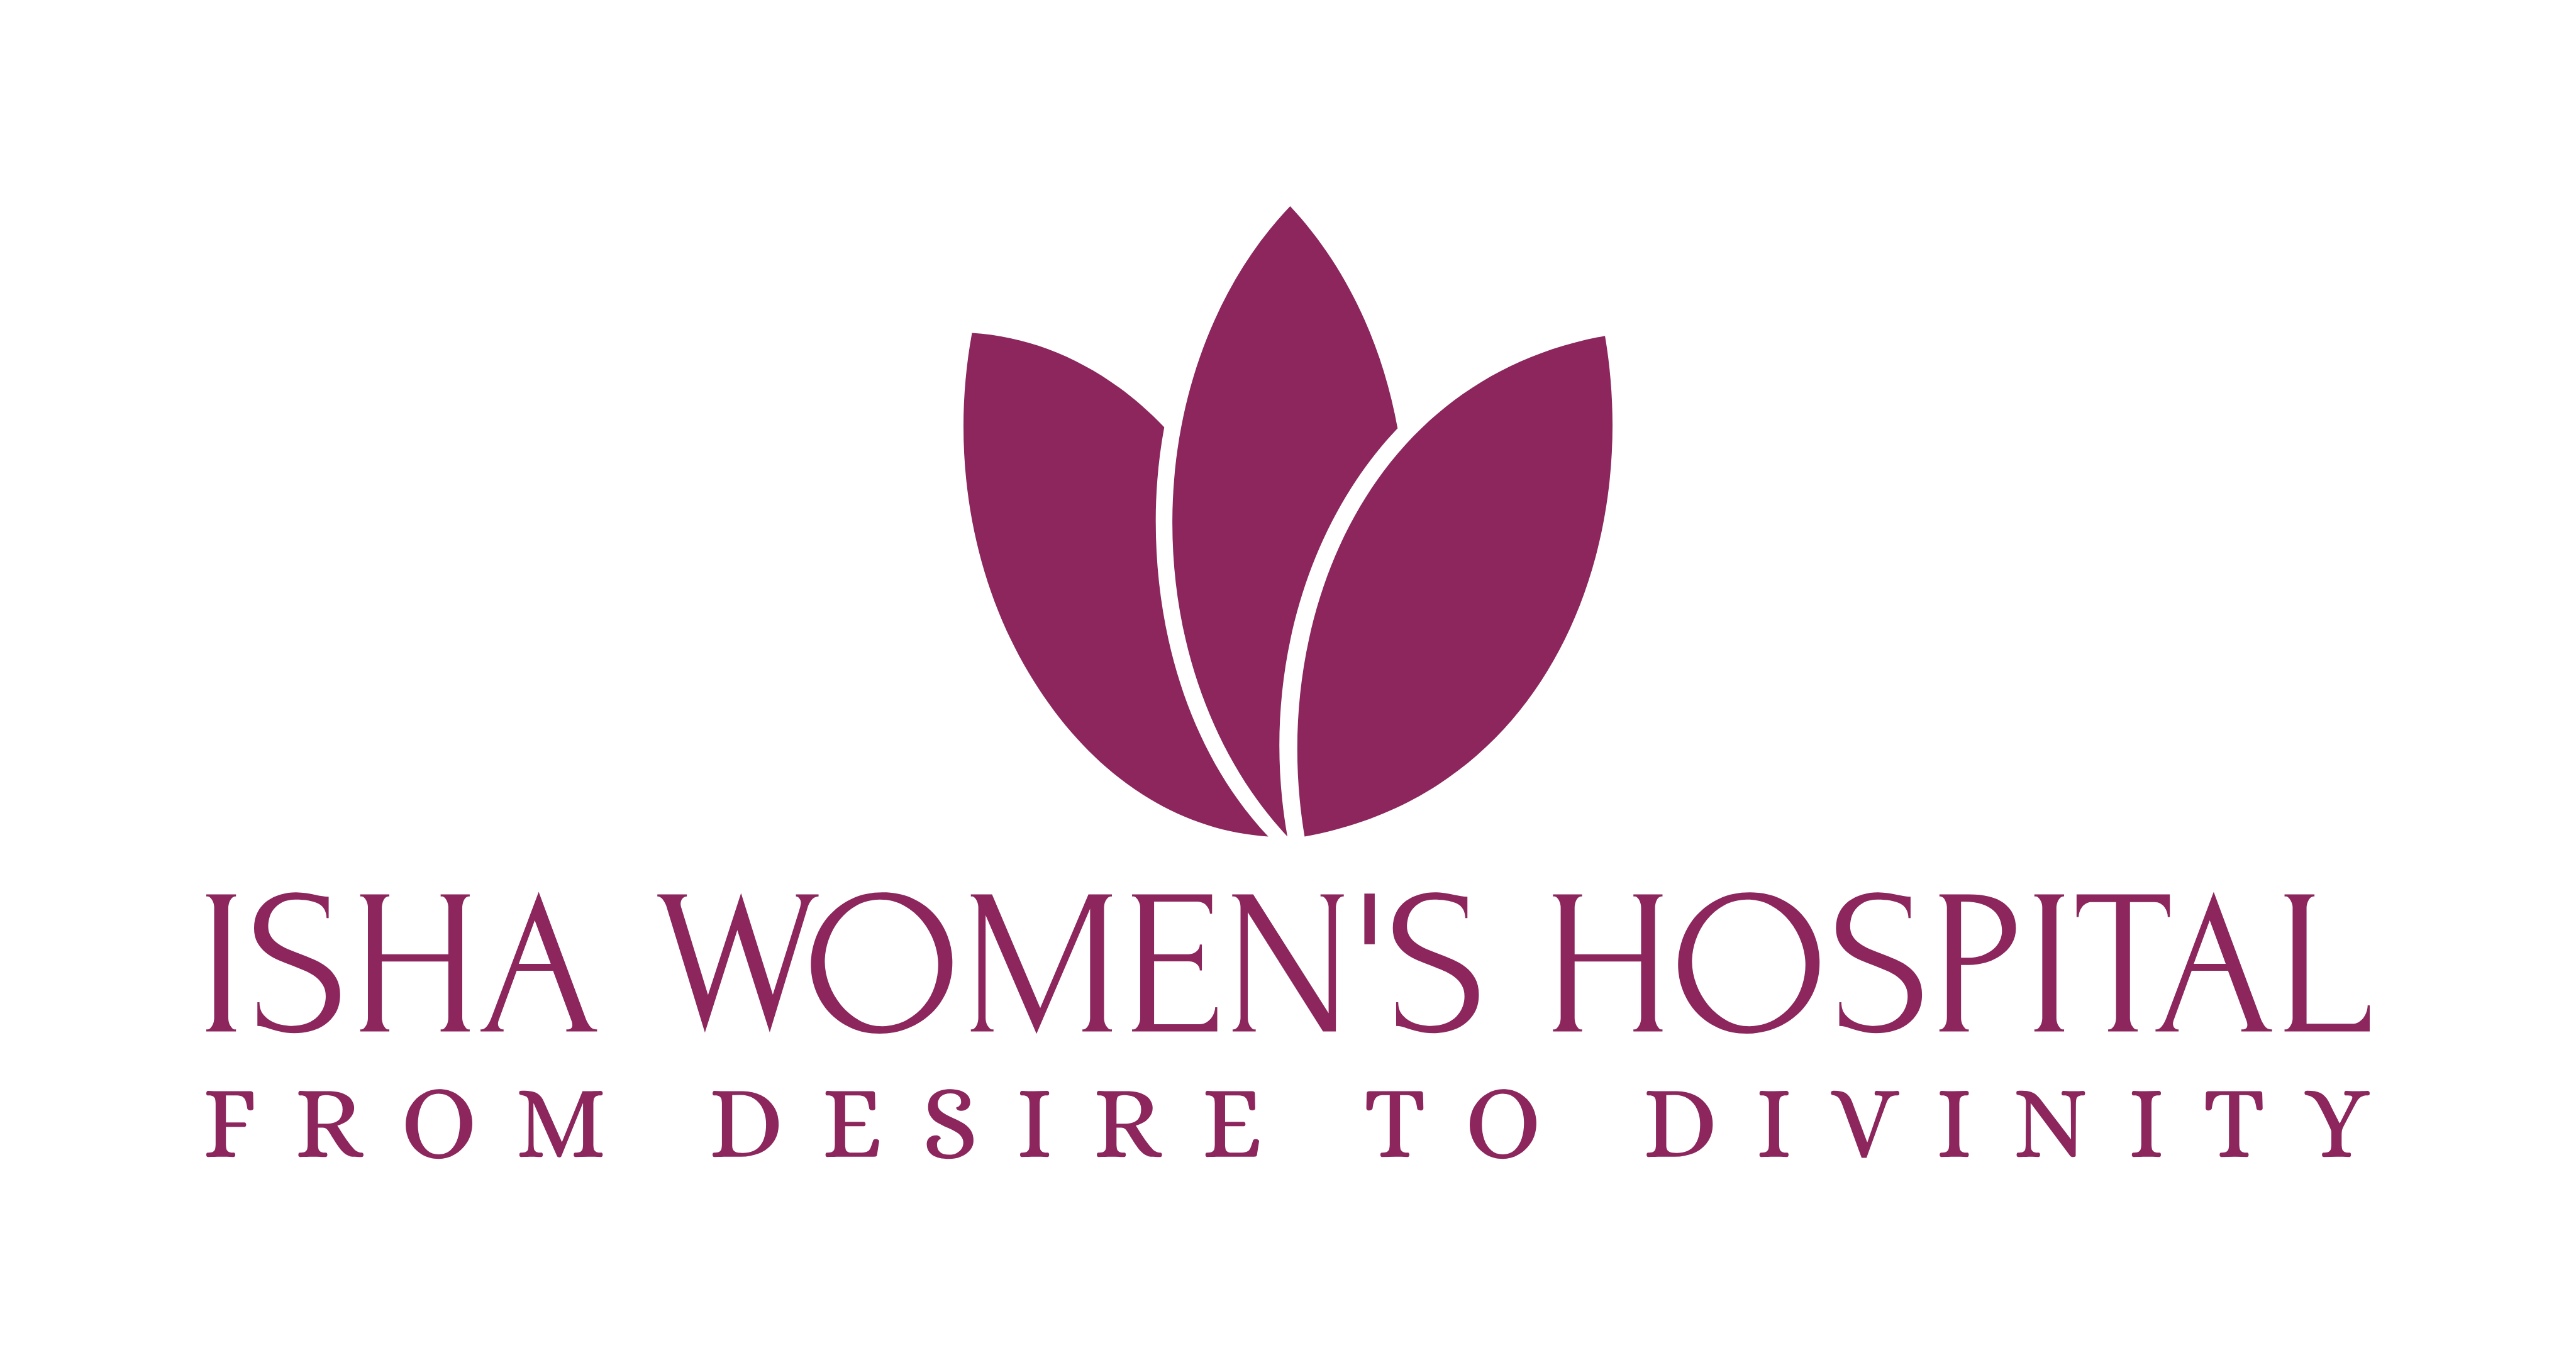 Isha Women's Hospital: Delivering World-Class Care and Service